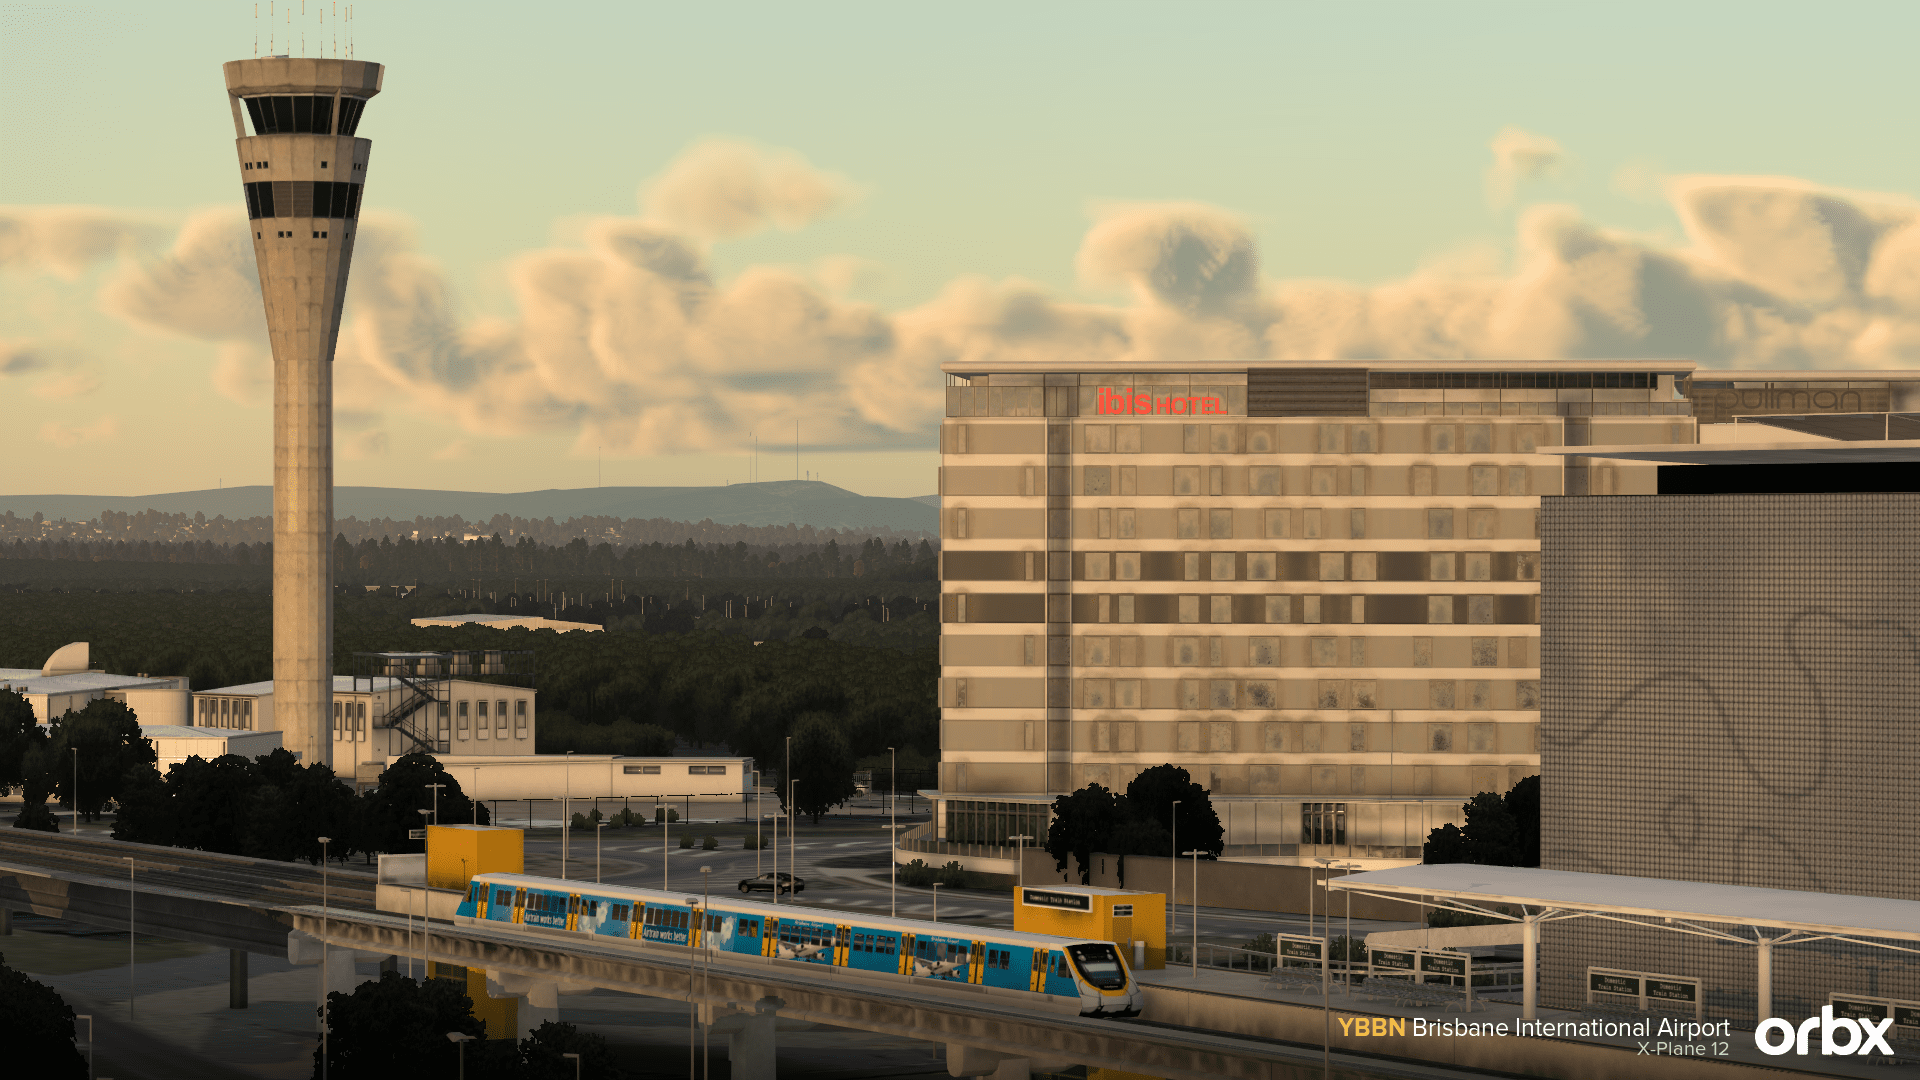 Orbx Releases Their Debut Scenery for X-Plane 12 - Orbx, X-Plane